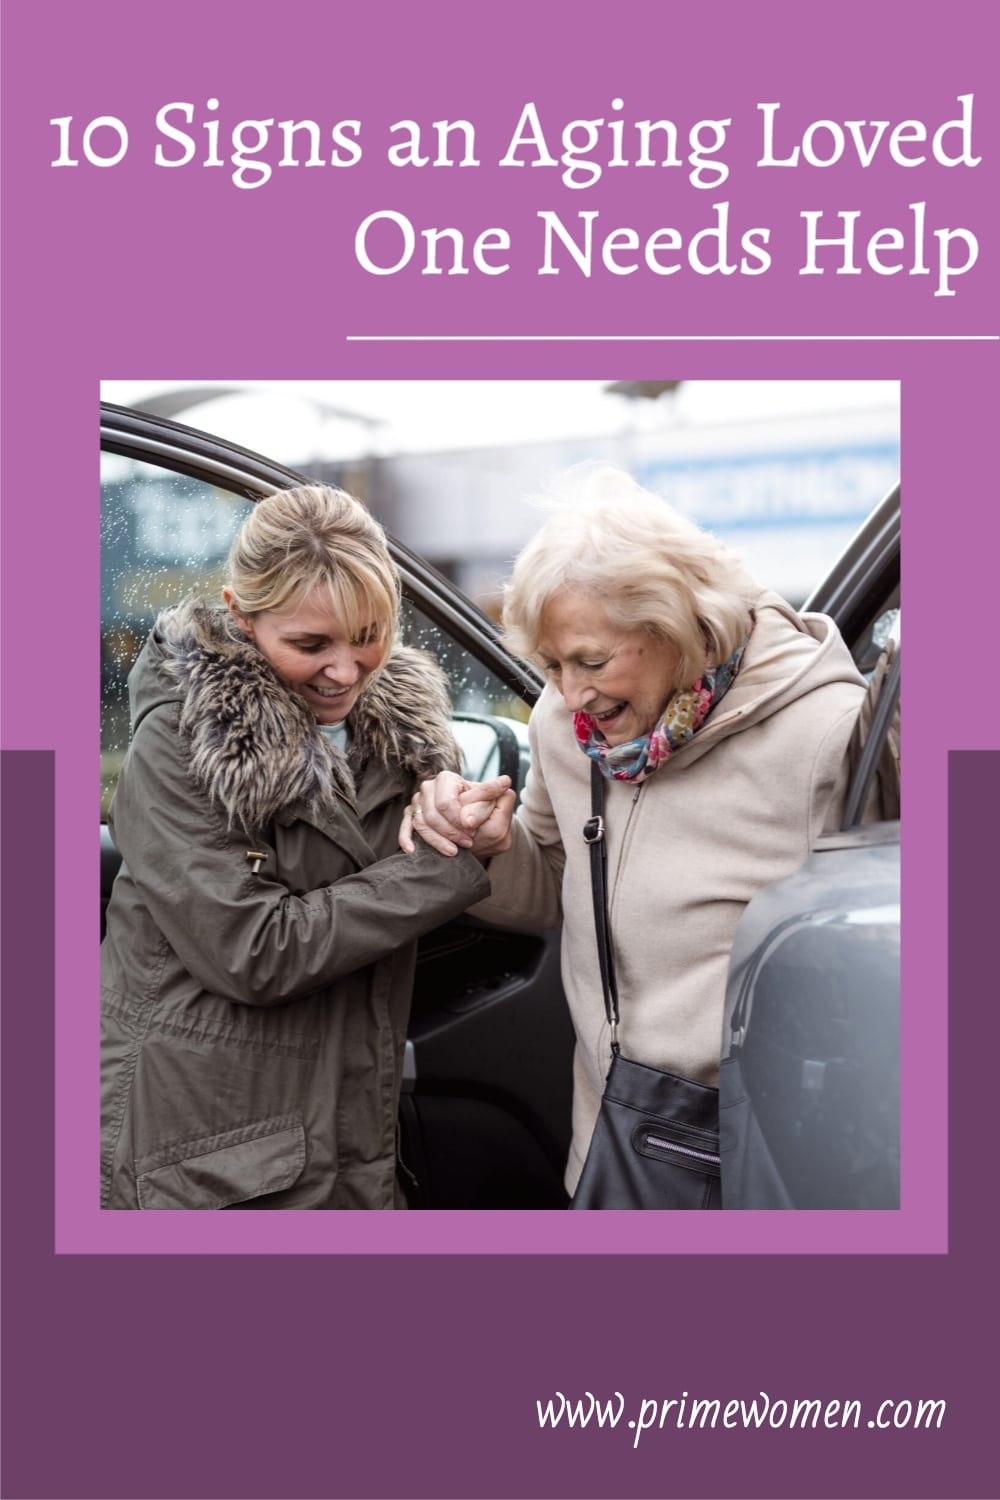 10 Signs an aging loved one needs help